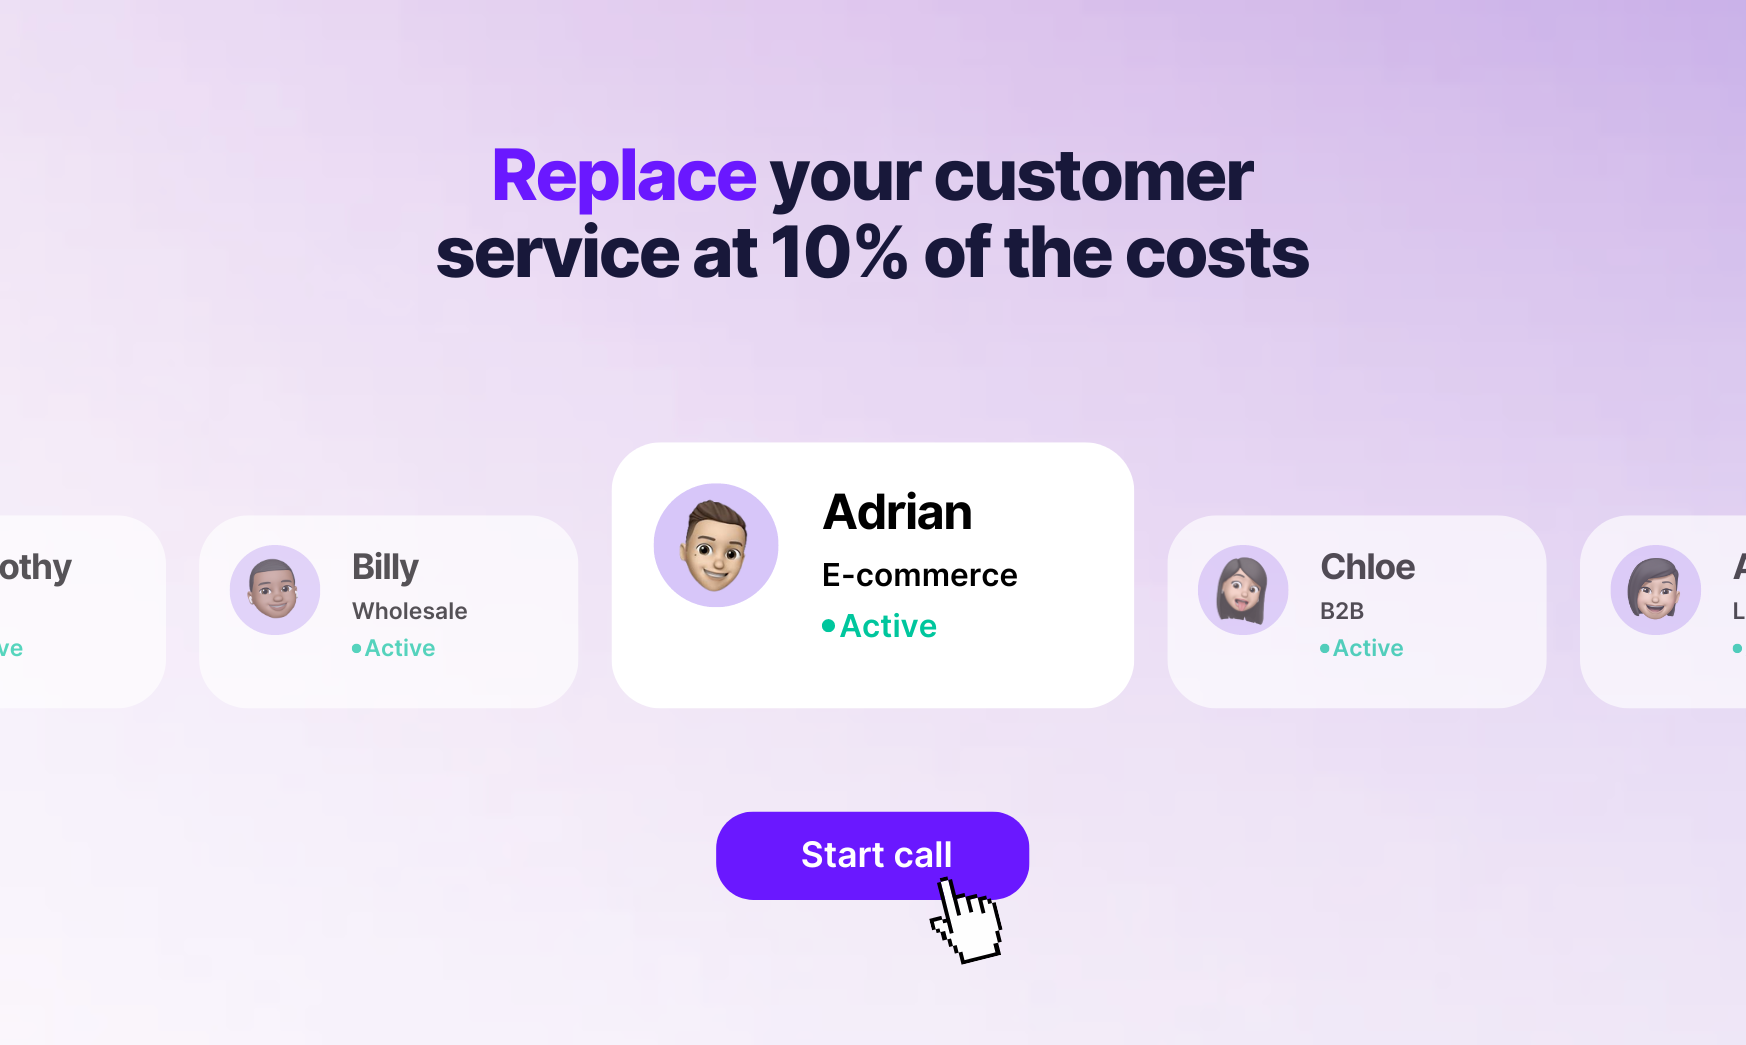 ringly-io - Replace customer service with an AI phone agent